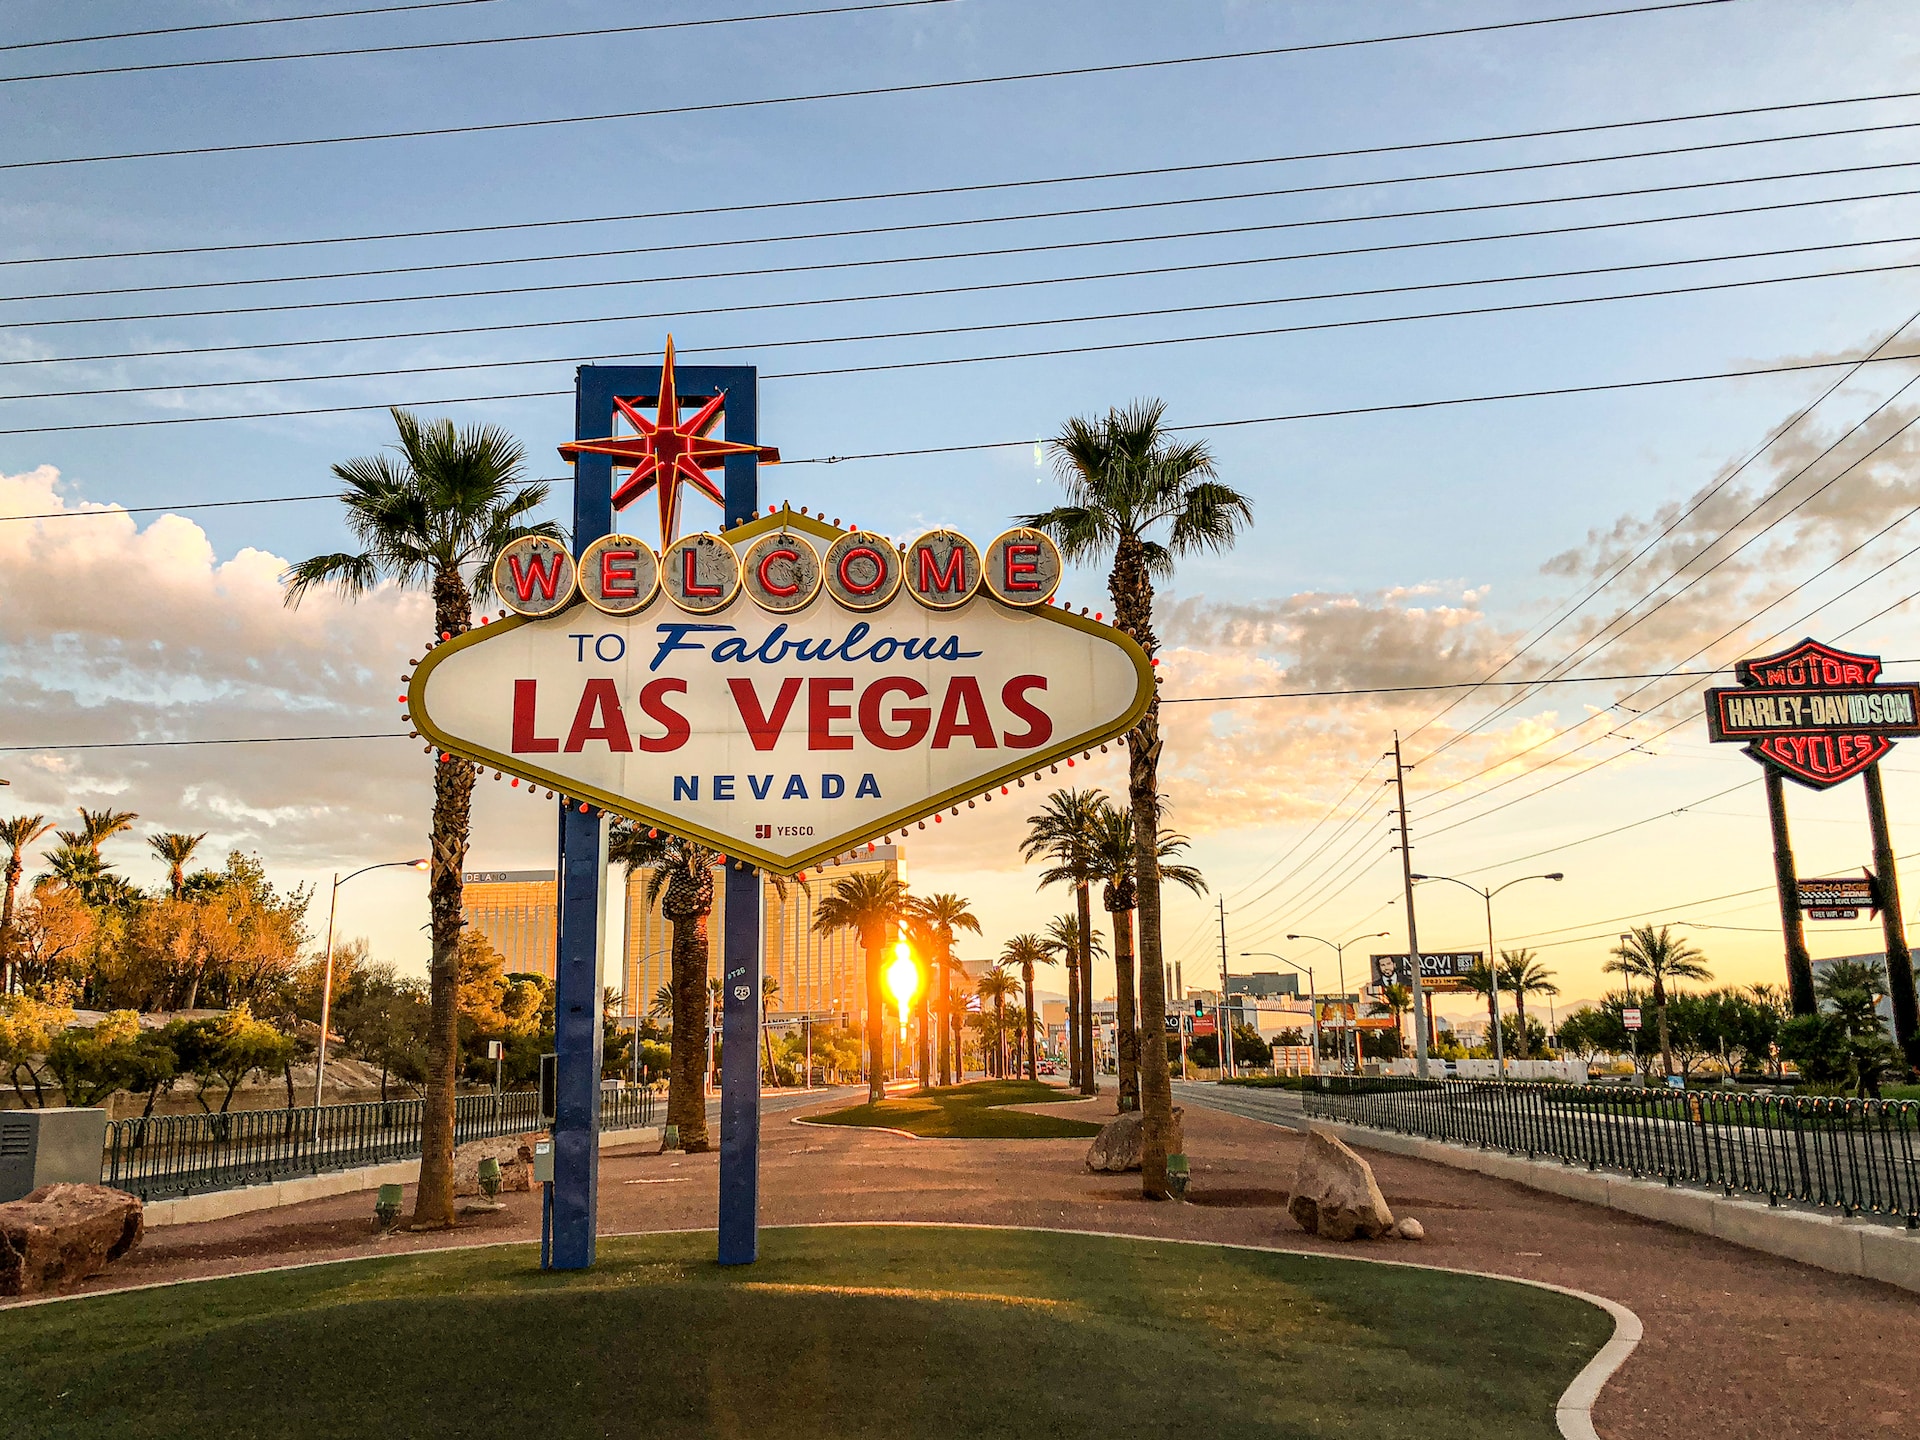 The 25 Best Things to Do in Las Vegas